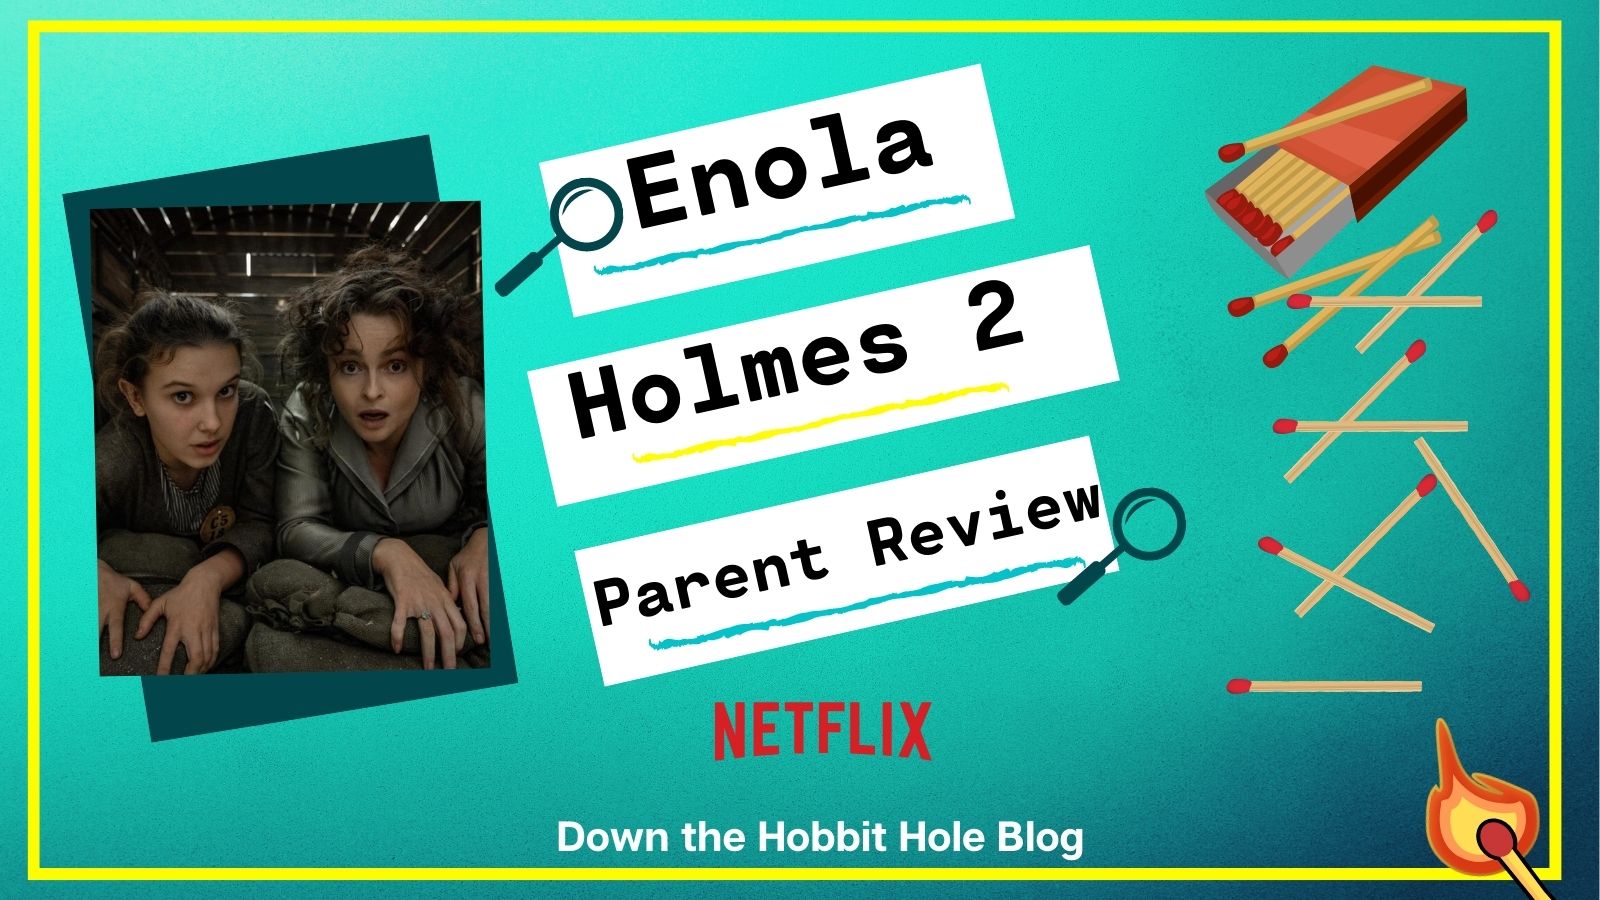 Enola holmes 2 discussion questions and parent reviews